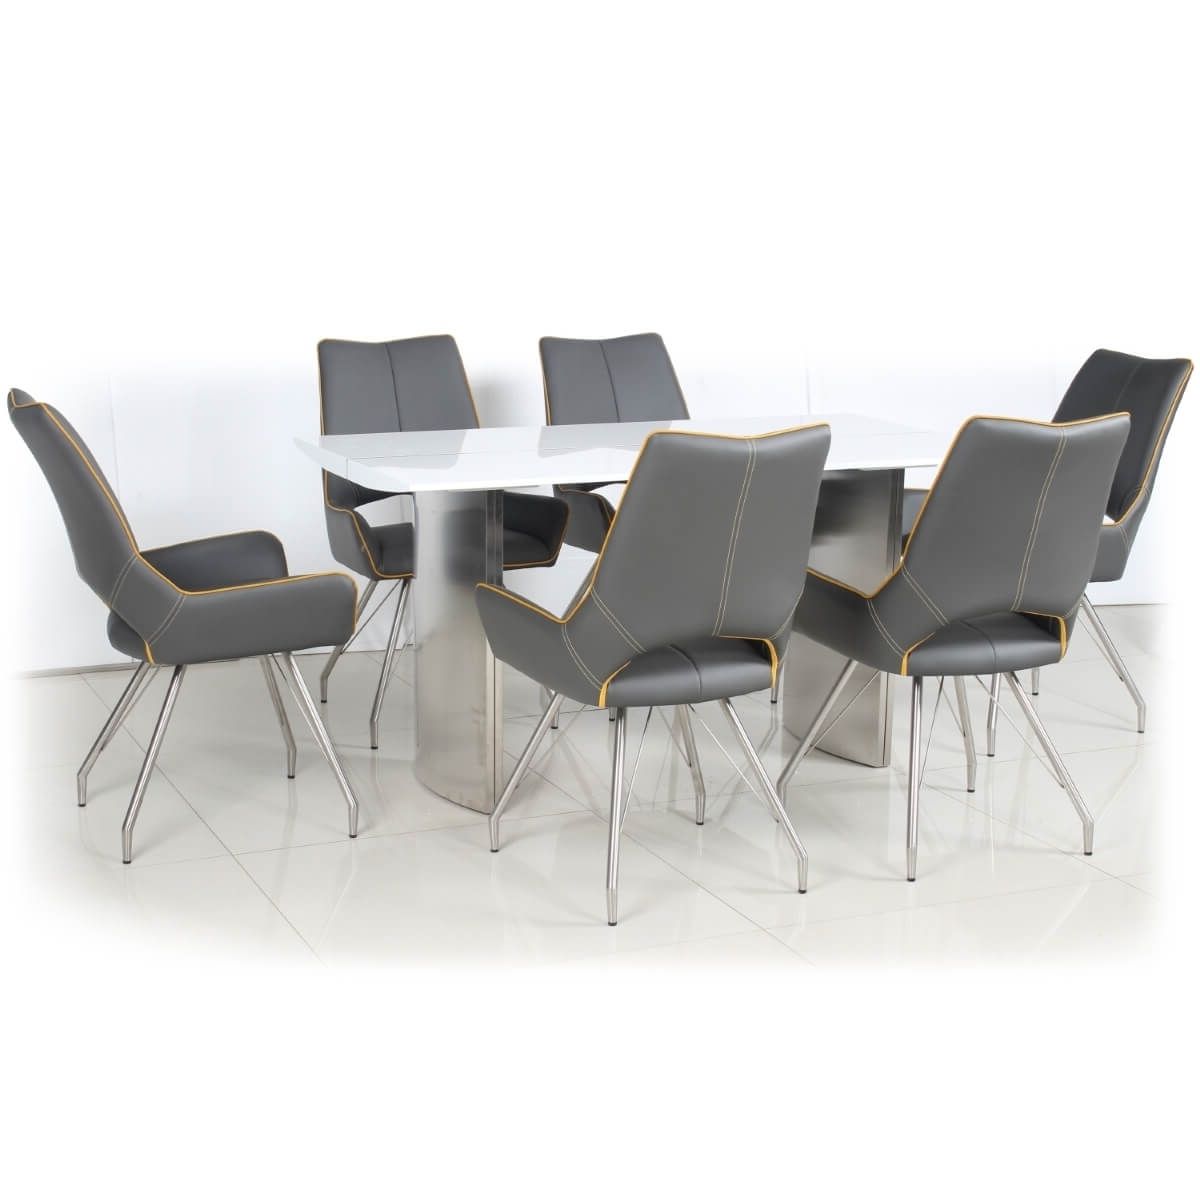 Most Recent High Gloss Dining Chairs Inside Dining Set – White High Gloss Dining Table And 6 Grey Dining Chairs (View 24 of 25)